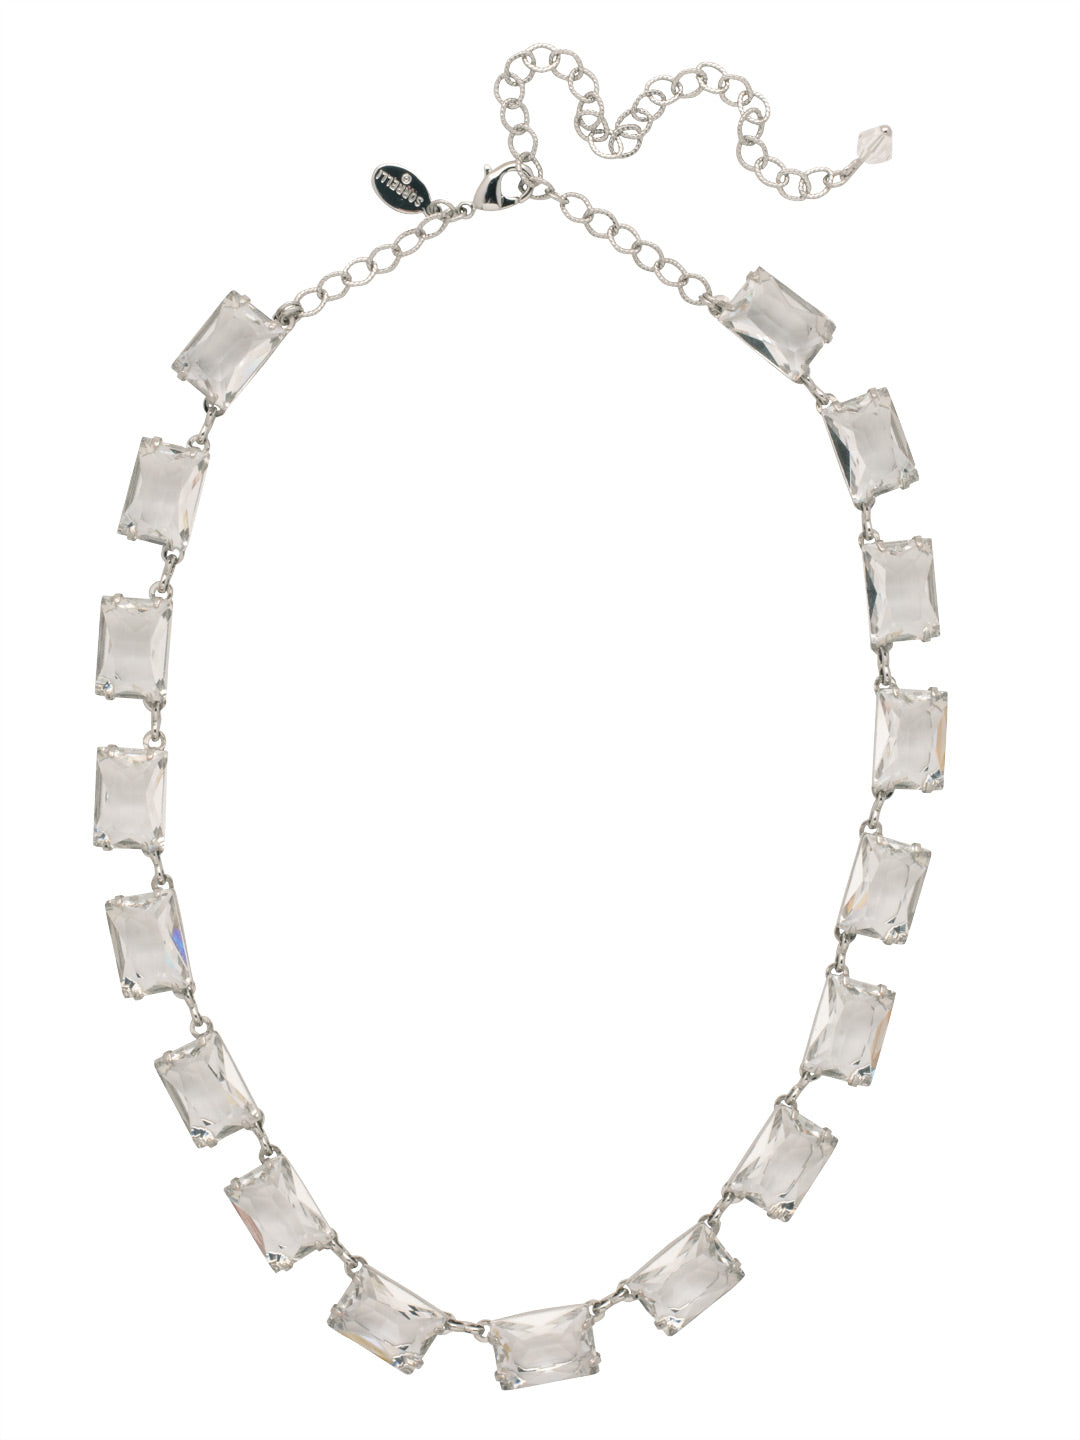 Julianna Mini Emerald Cut Statement Necklace - NFD78PDCRY - <p>The Julianna Mini Cut Statement Necklace features a row of emerald cut candy drop crystals around an adjustable chain, secured with a lobster claw clasp. From Sorrelli's Crystal collection in our Palladium finish.</p>